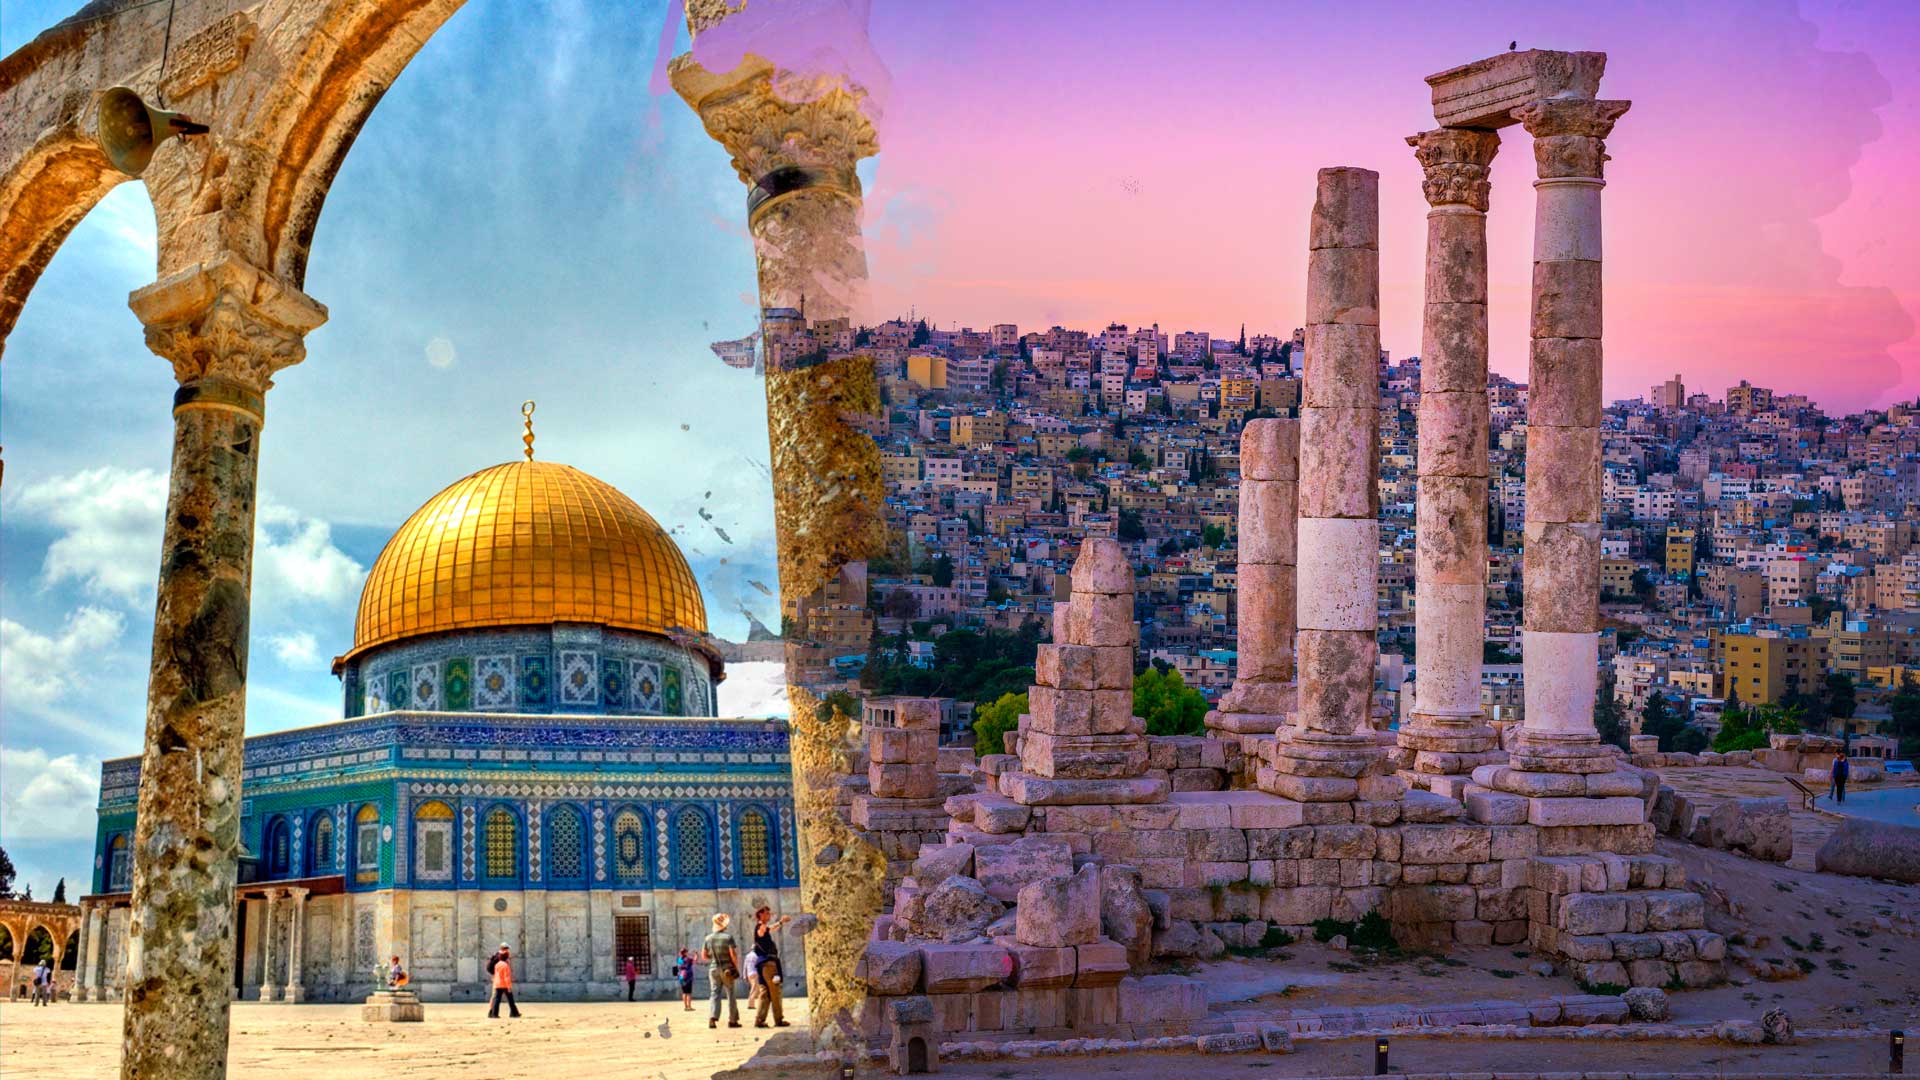 The best guide for Al Aqsa tours